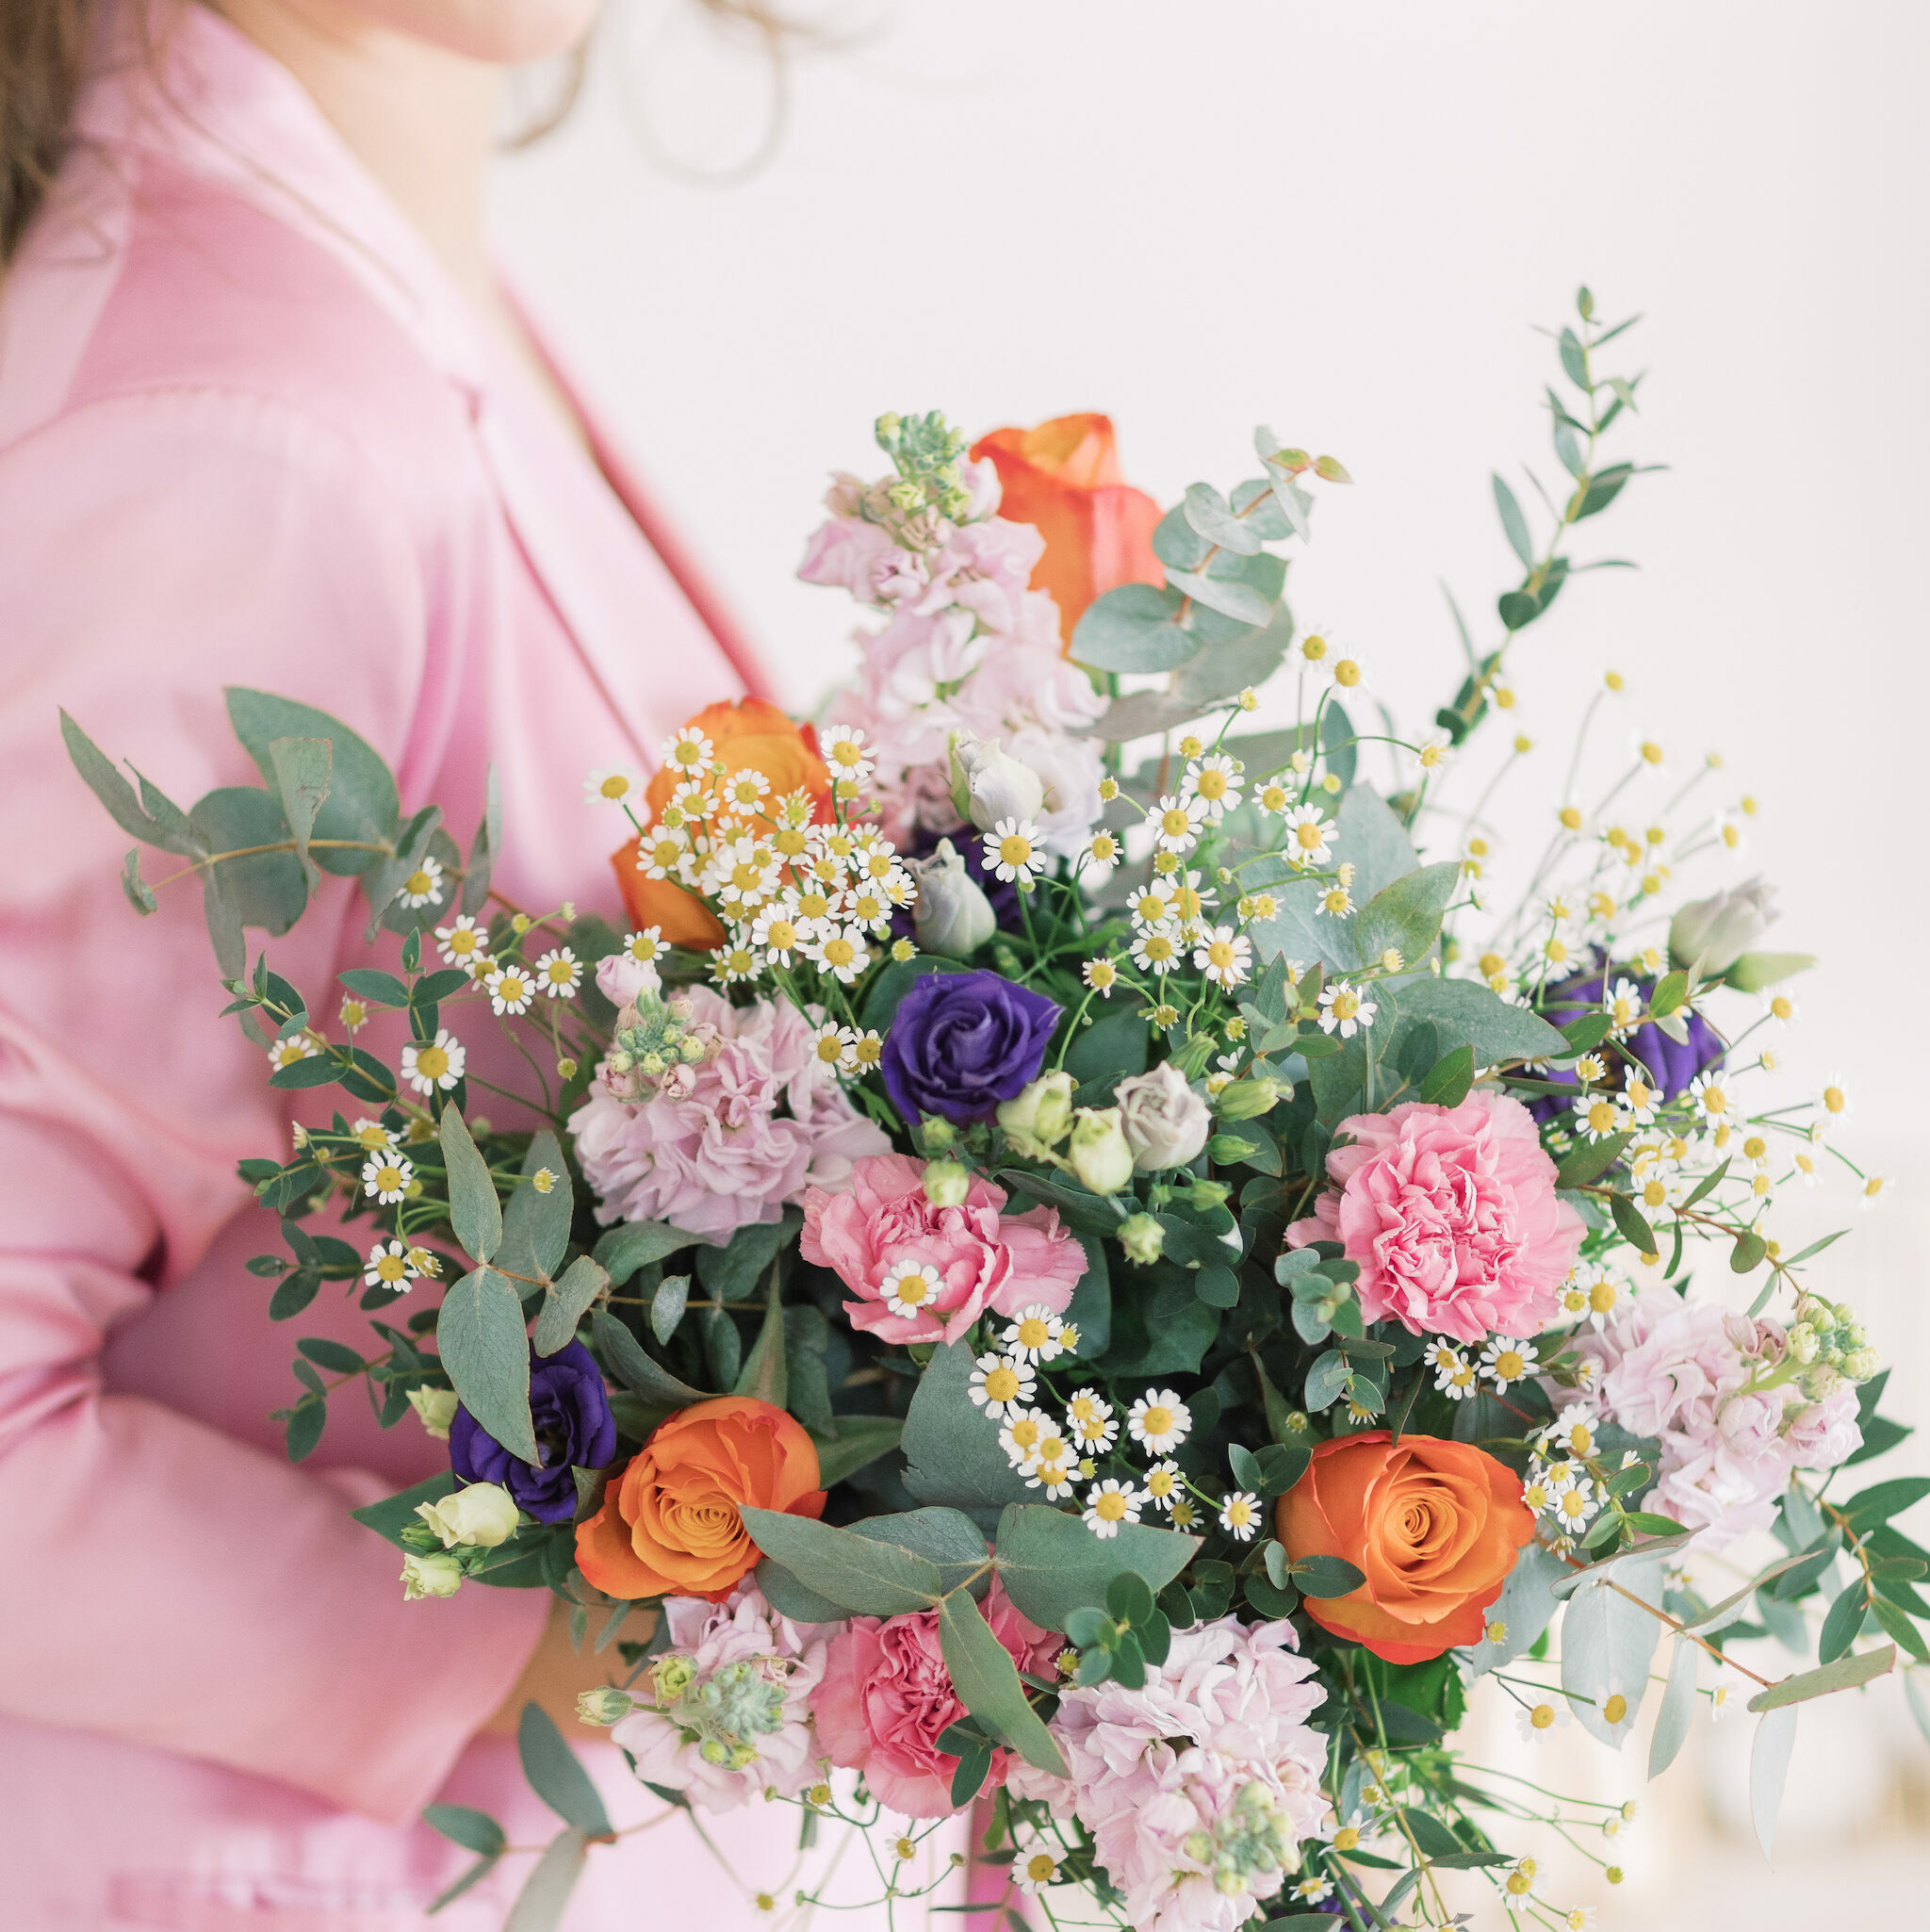 Send a bouquet to Evere within 24 hours